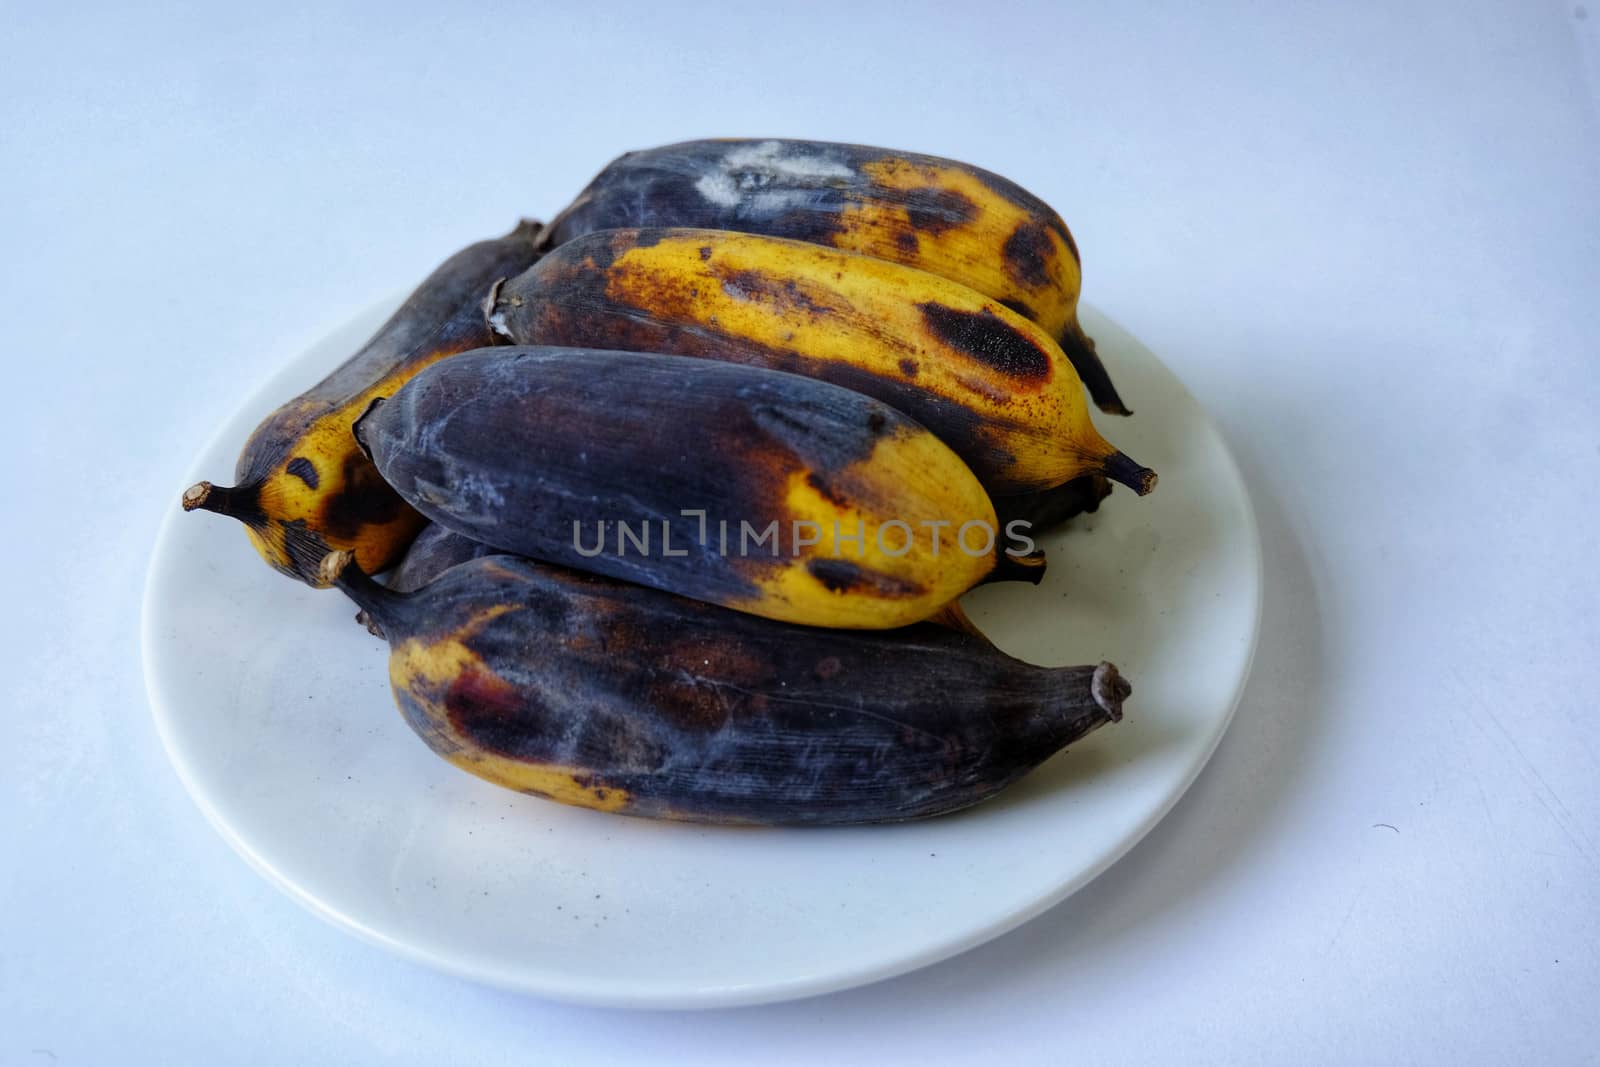 Rotten banana mold Isolated in a white dish on white background.